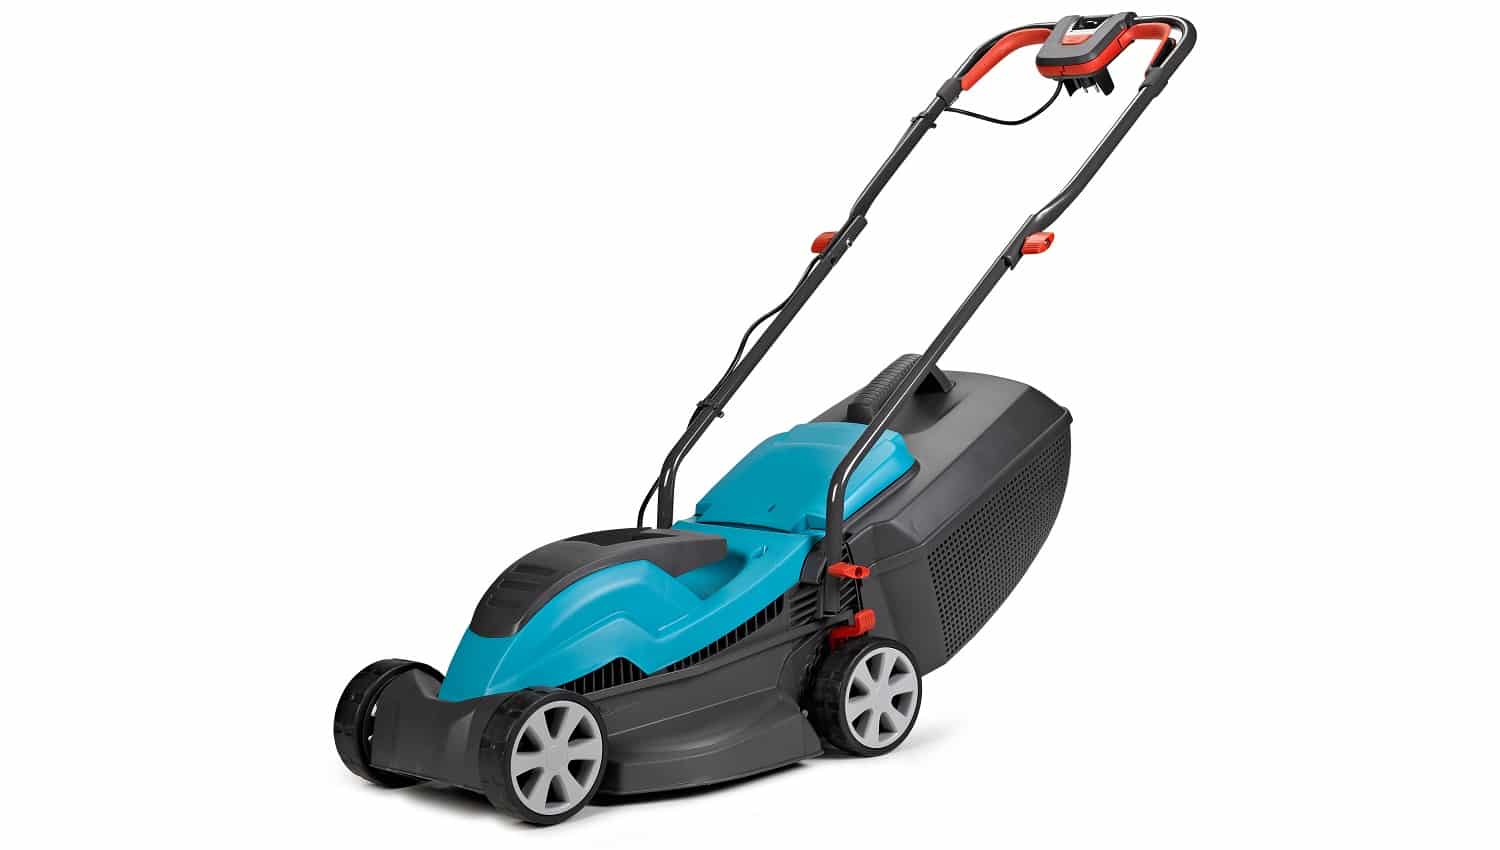 Lawn mower. Isolated on white background, clipping path